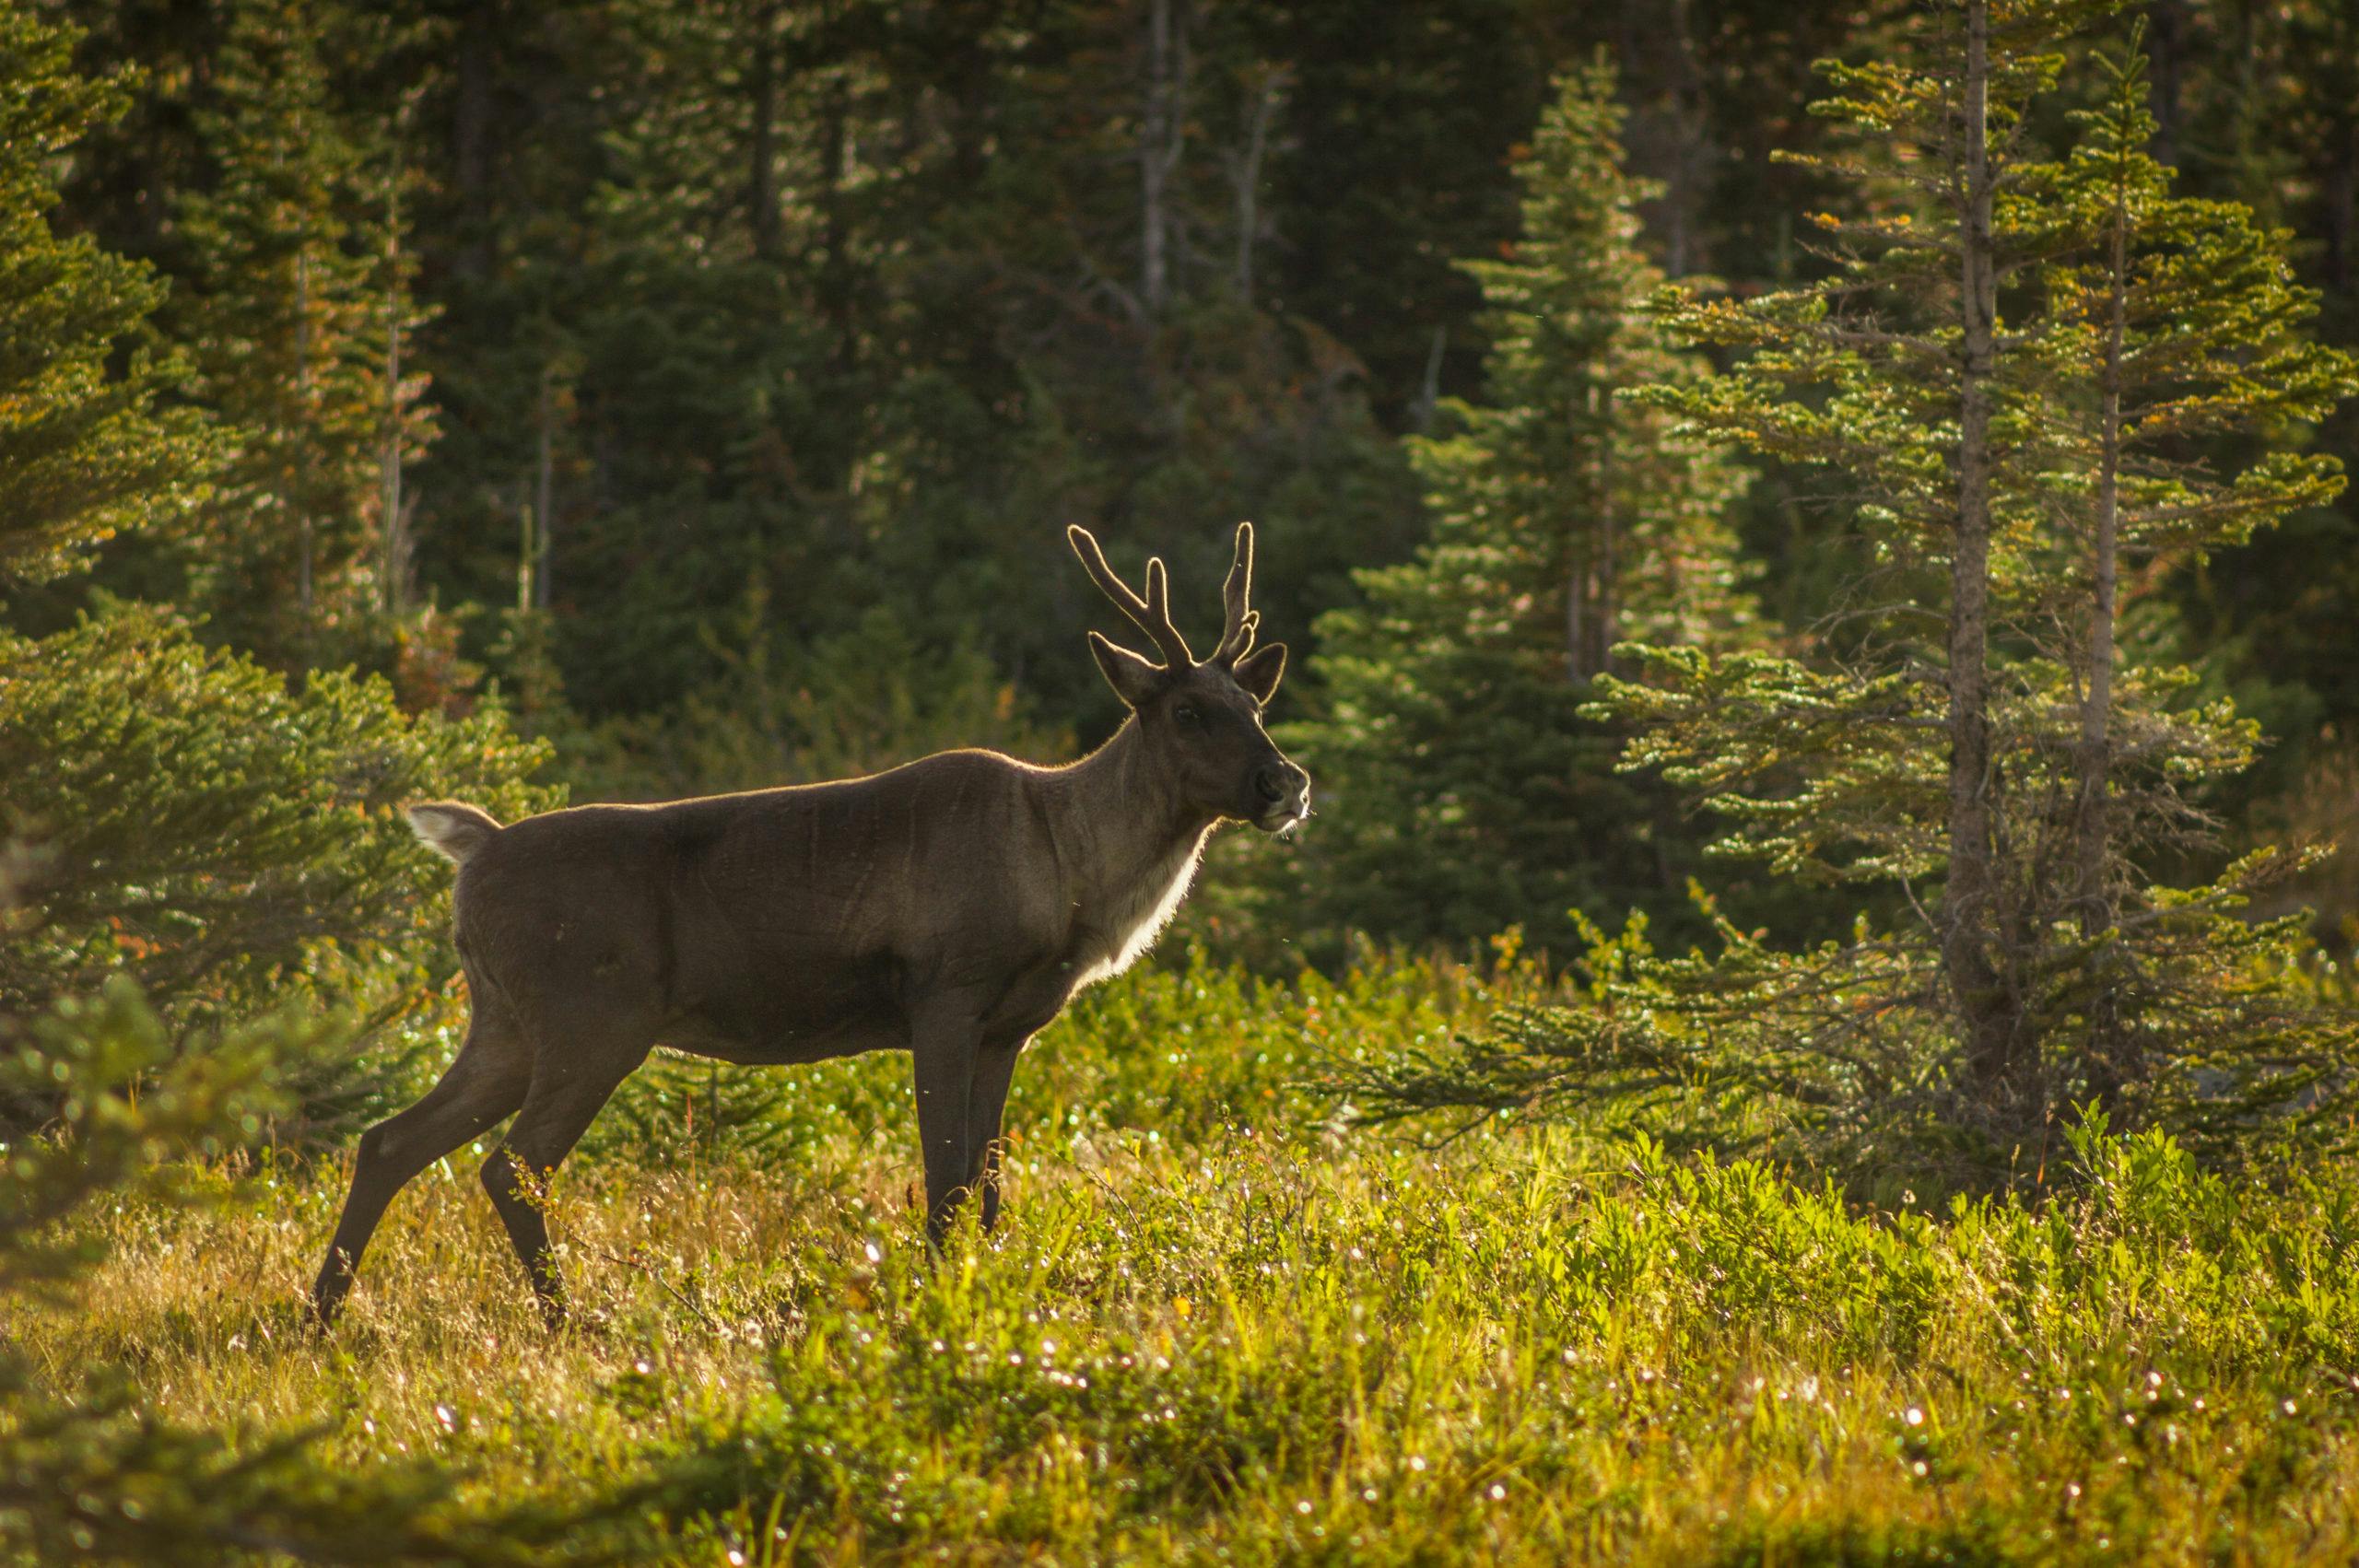 The southern mountain caribou has suffered 60% declines and is listed as endangered under the Species at Risk Act (SARA). Photo by ThartmannWiki (creative commons)